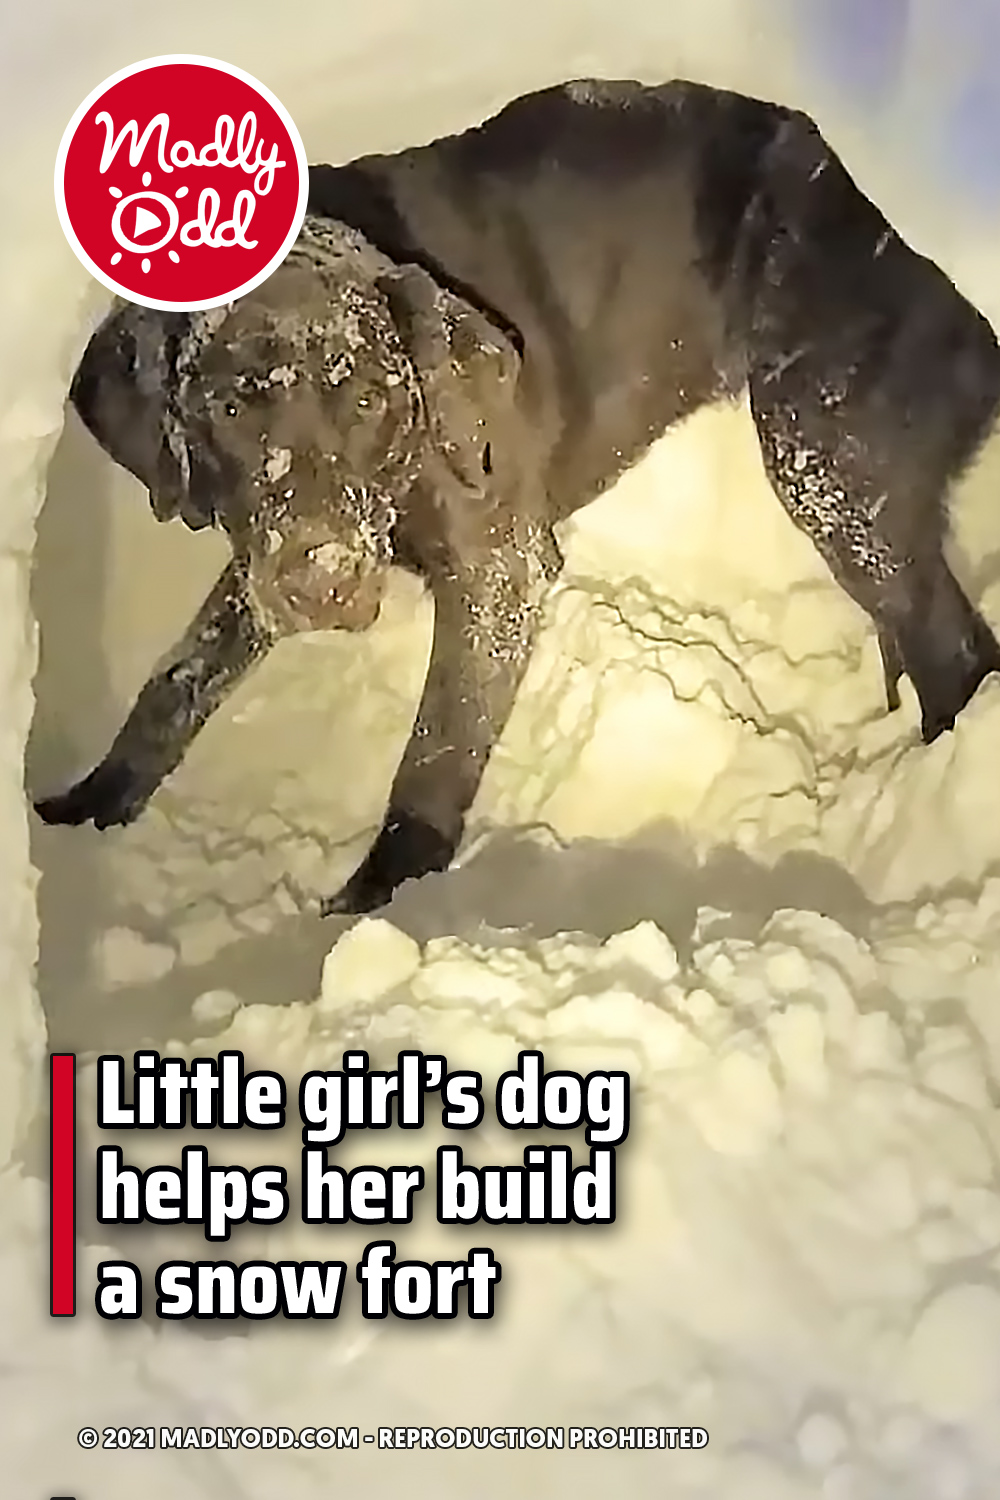 Little girl’s dog helps her build a snow fort